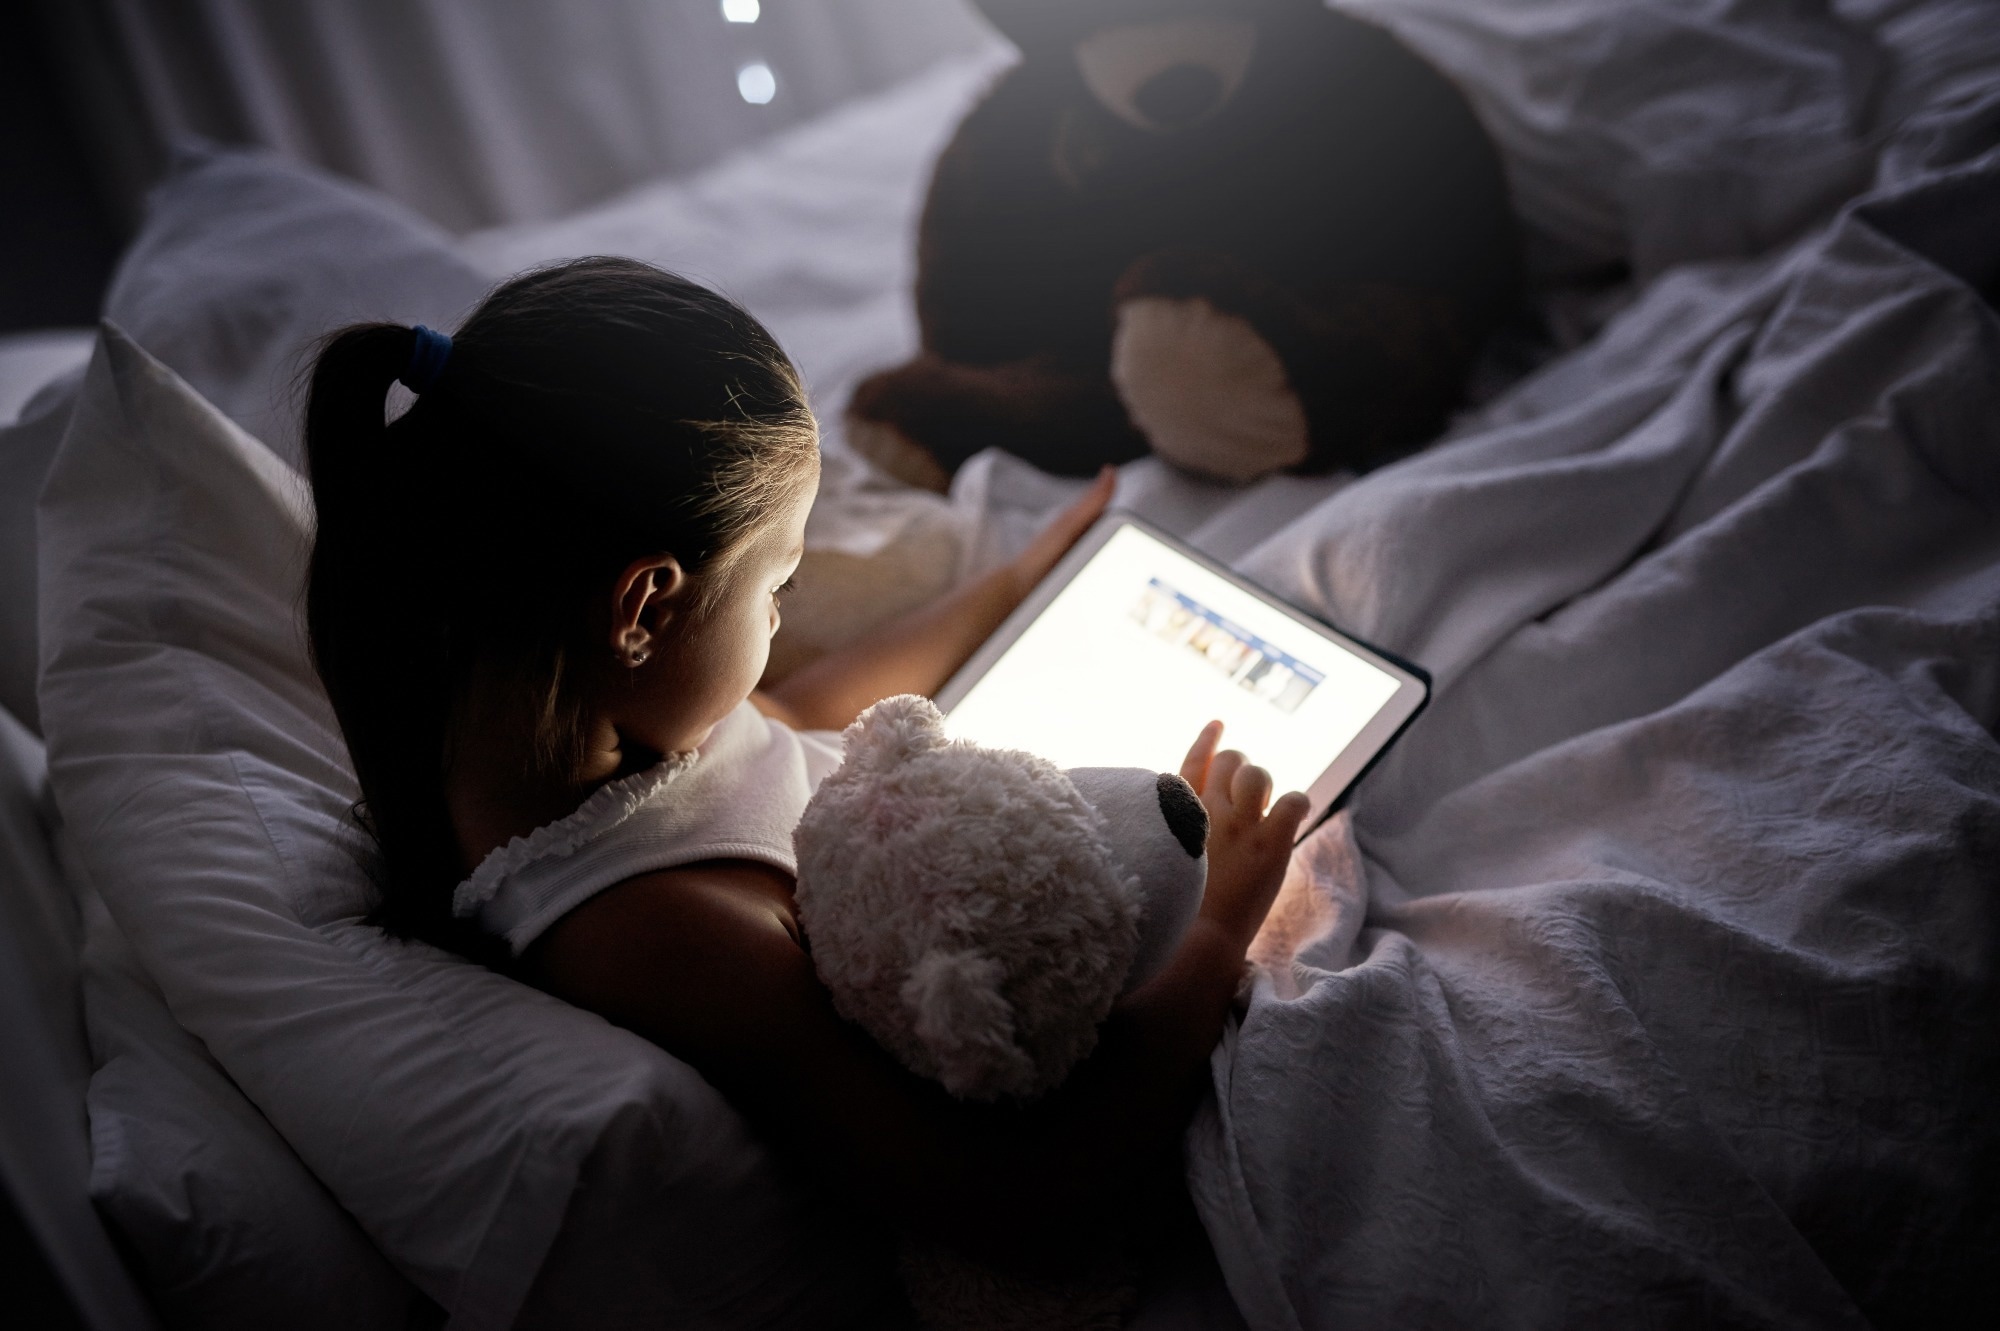 How bedtime screen use affects sleep in early adolescents